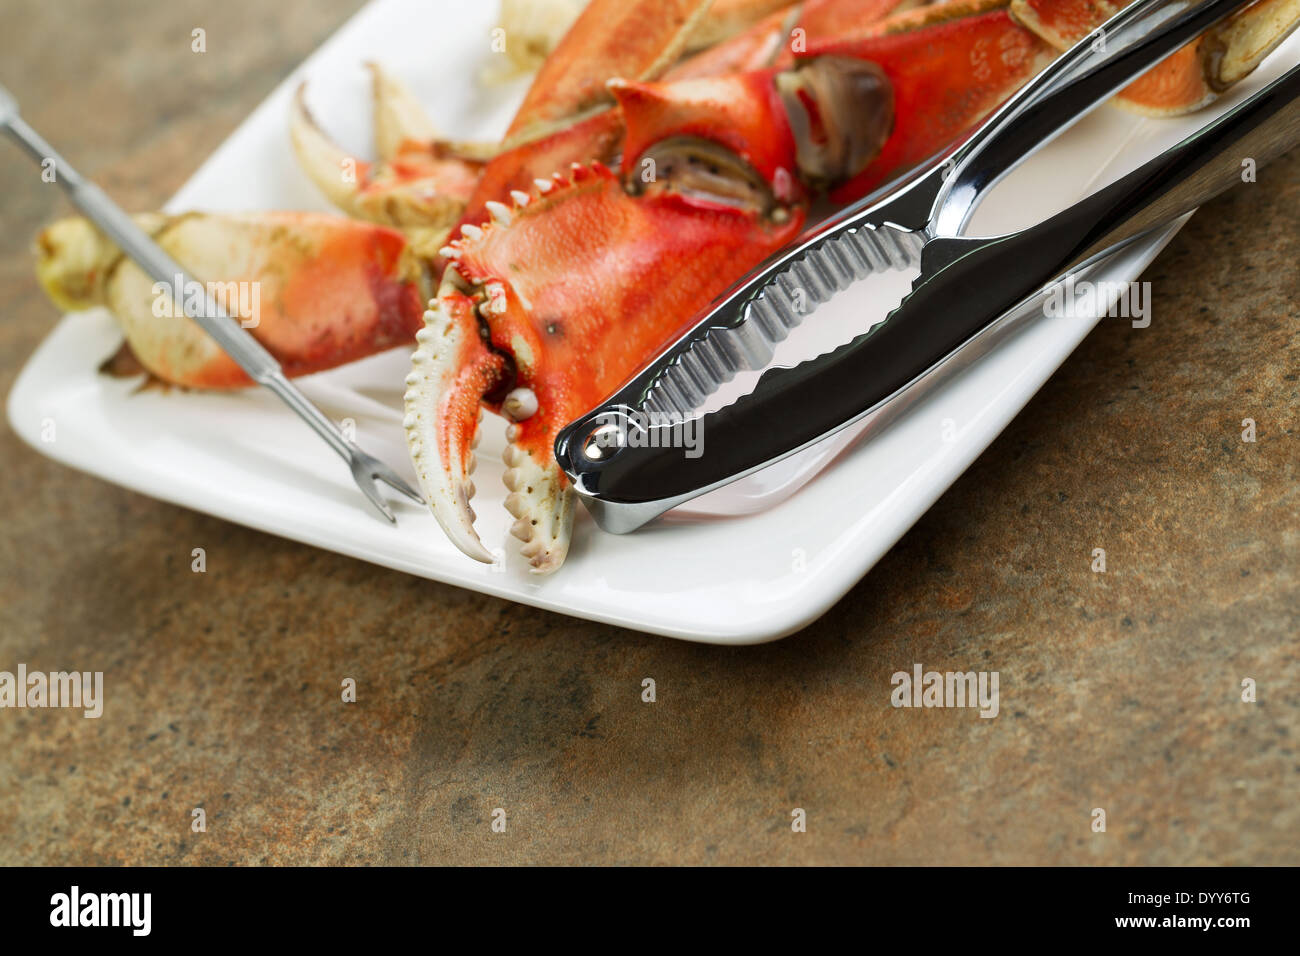 Closeup horizontal photo of freshly cooked Dungeness crab legs on white plate with stainless crab crackers and stone counter top Stock Photo